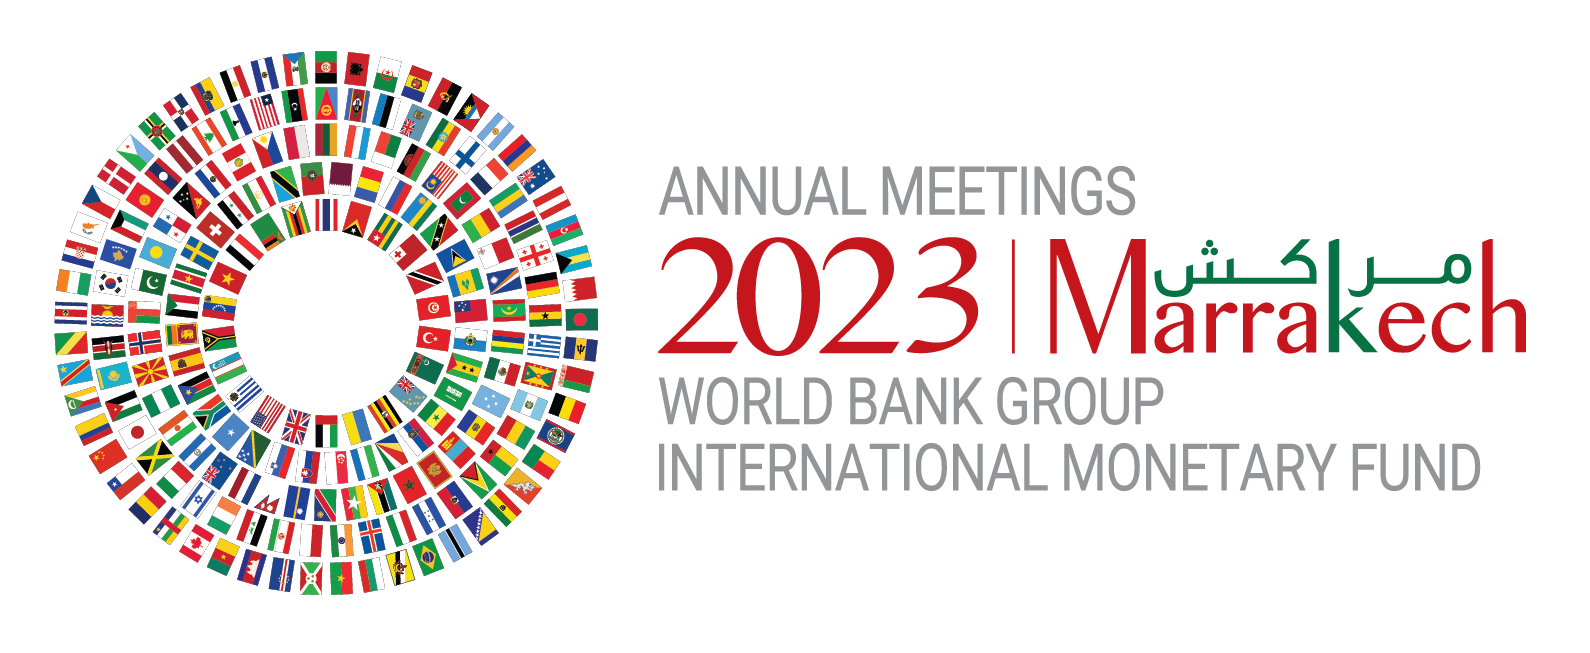 WB-IMF Annual Meetings, opportunity to showcase Morocco’s and Africa’s immense diversity, vibrance (Senior UN Official)